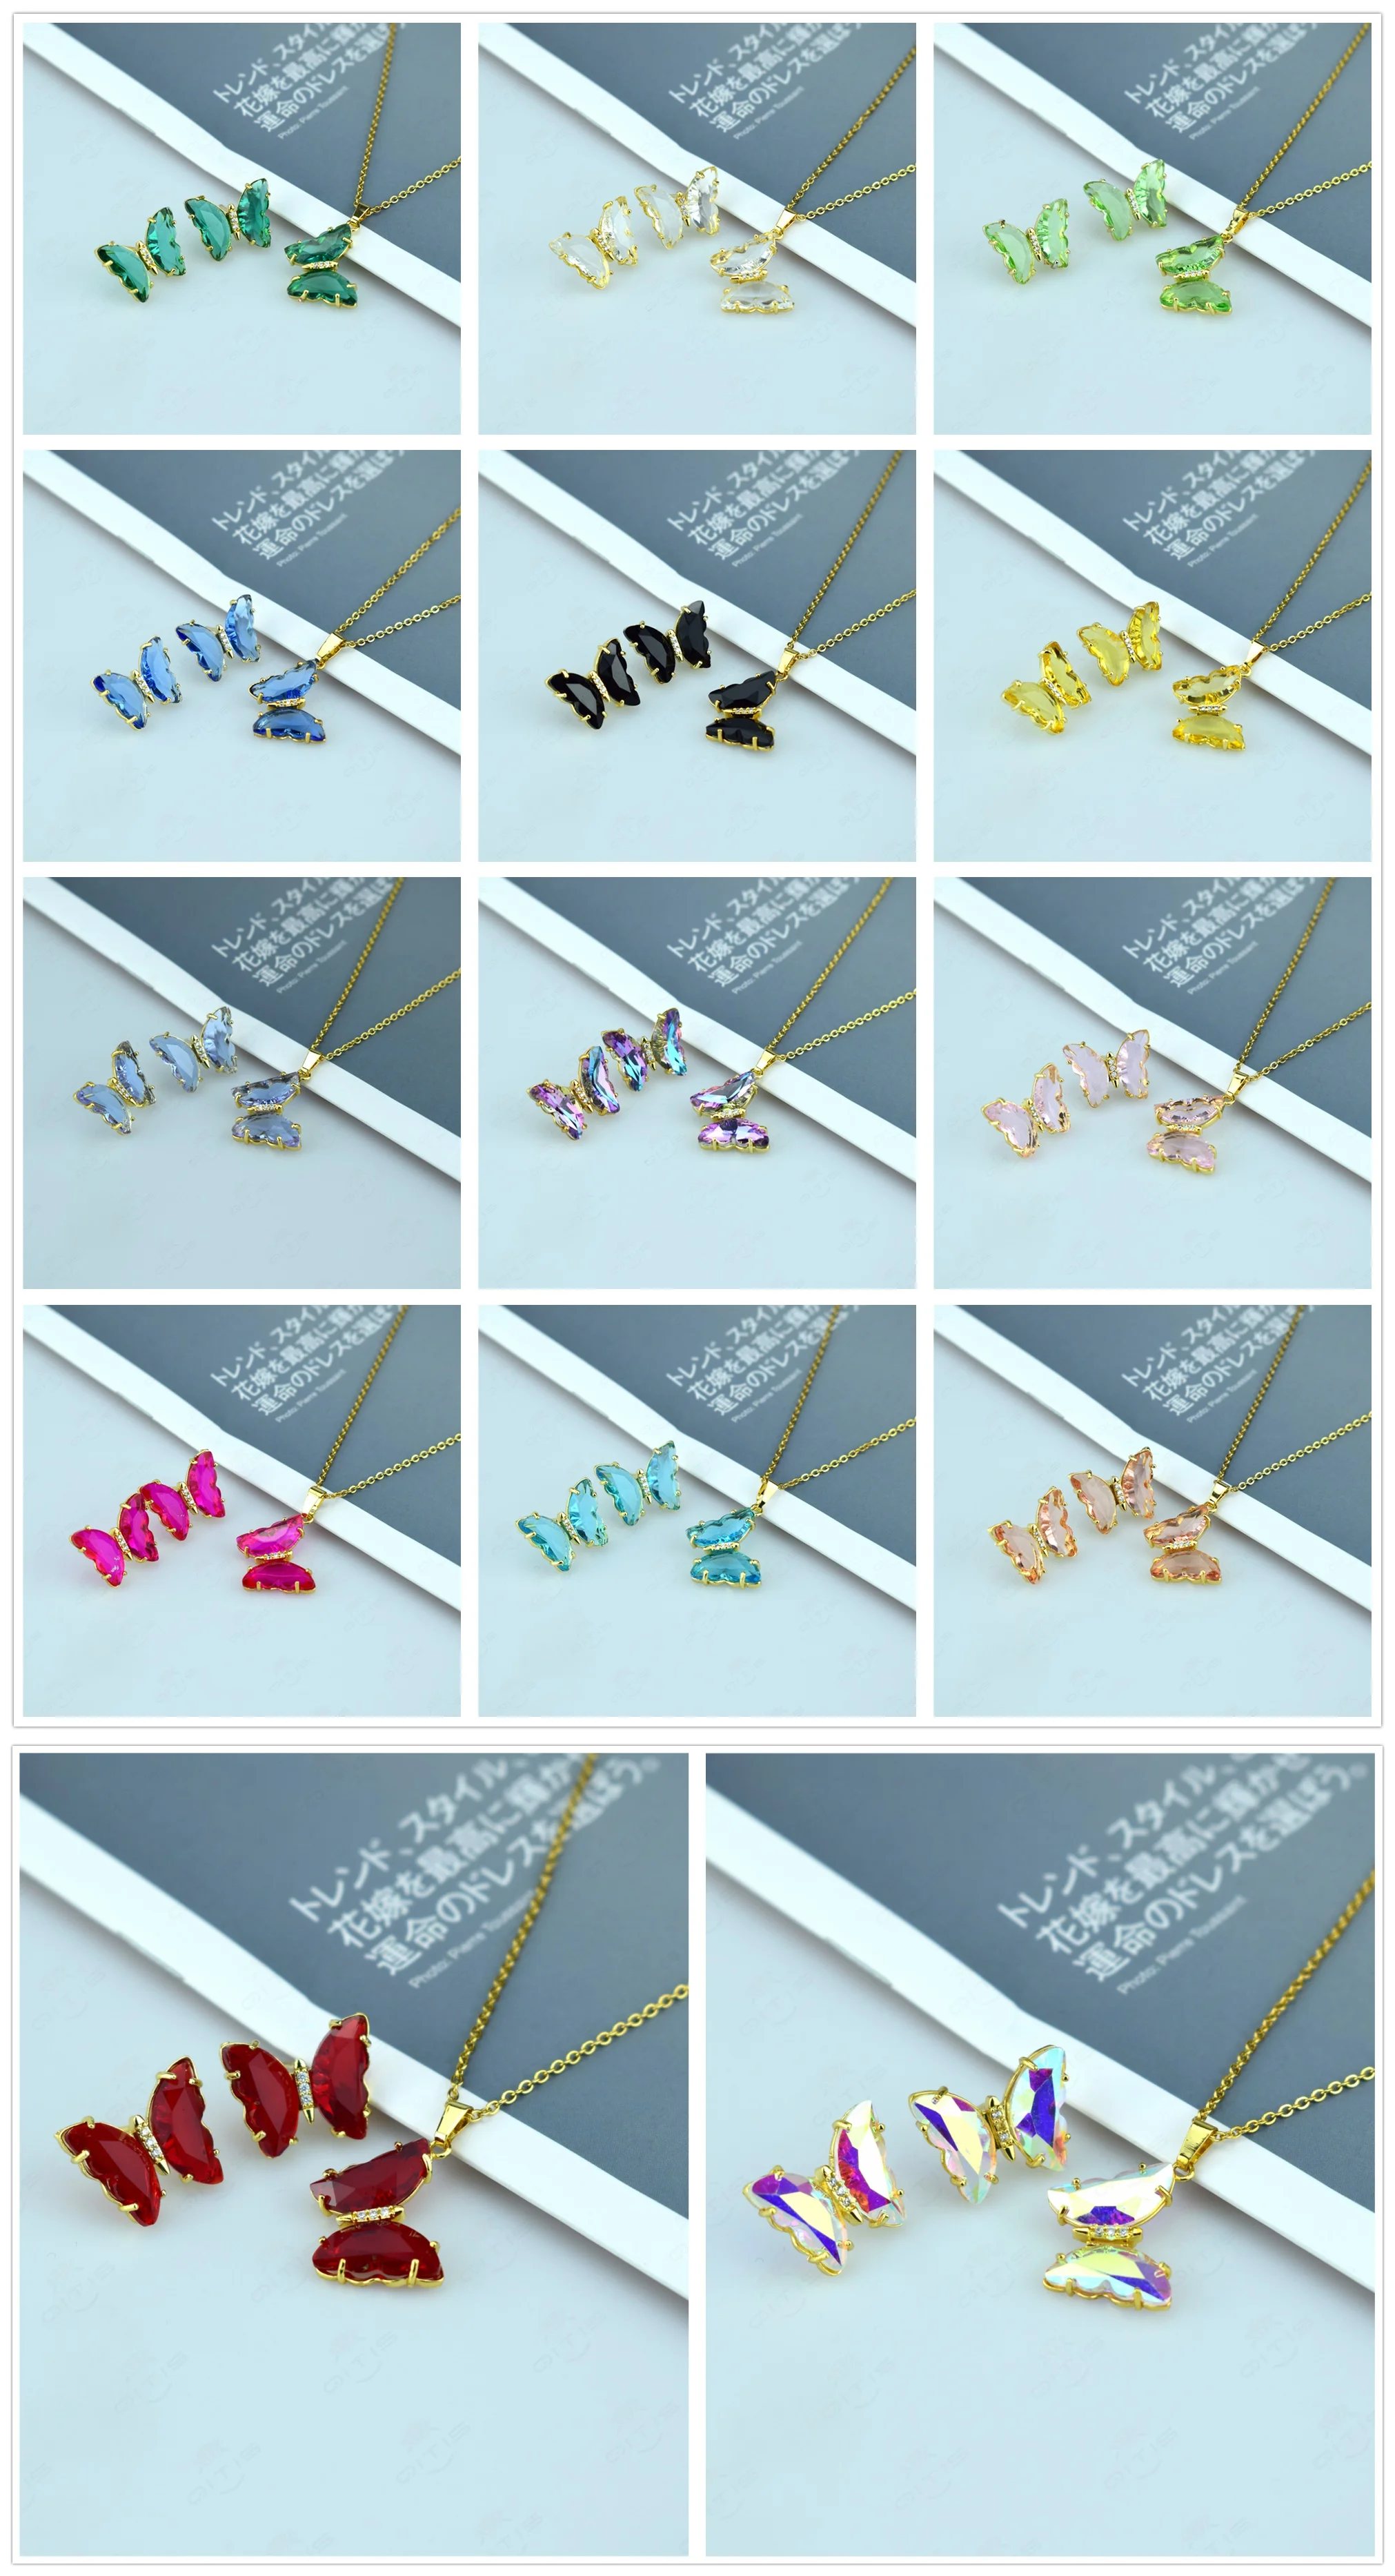 latest fashion necklace designs 2021 New Fashion Hot-selling Butterfly Crystal Necklace AAA Micro-set Zircon Stud Earrings Jewelry Gift Wholesale Direct Mail fashion pearl necklace